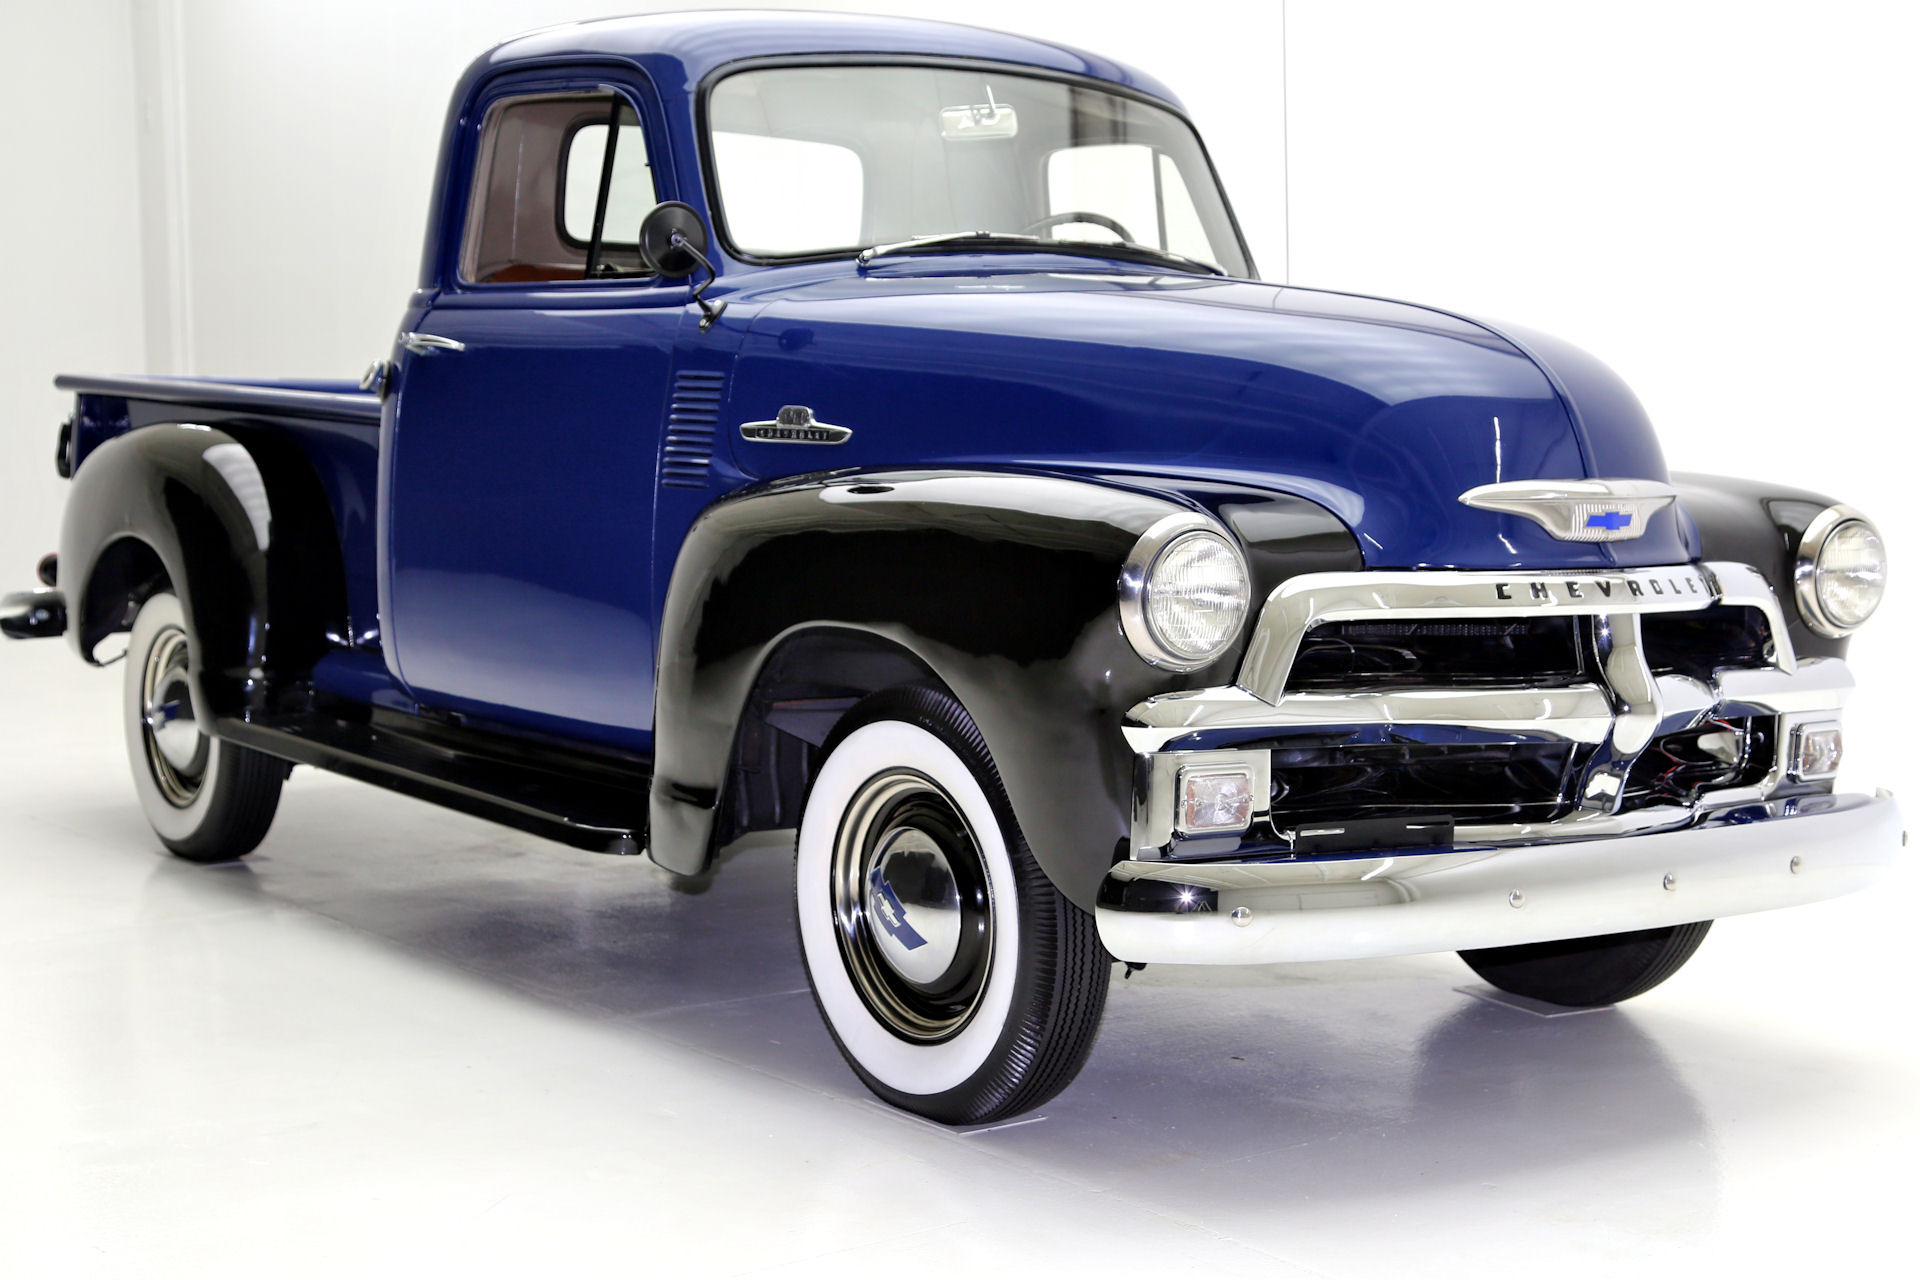 For Sale Used 1955 Chevrolet 3100 New Chrome, Two Tone Paint American Dream...